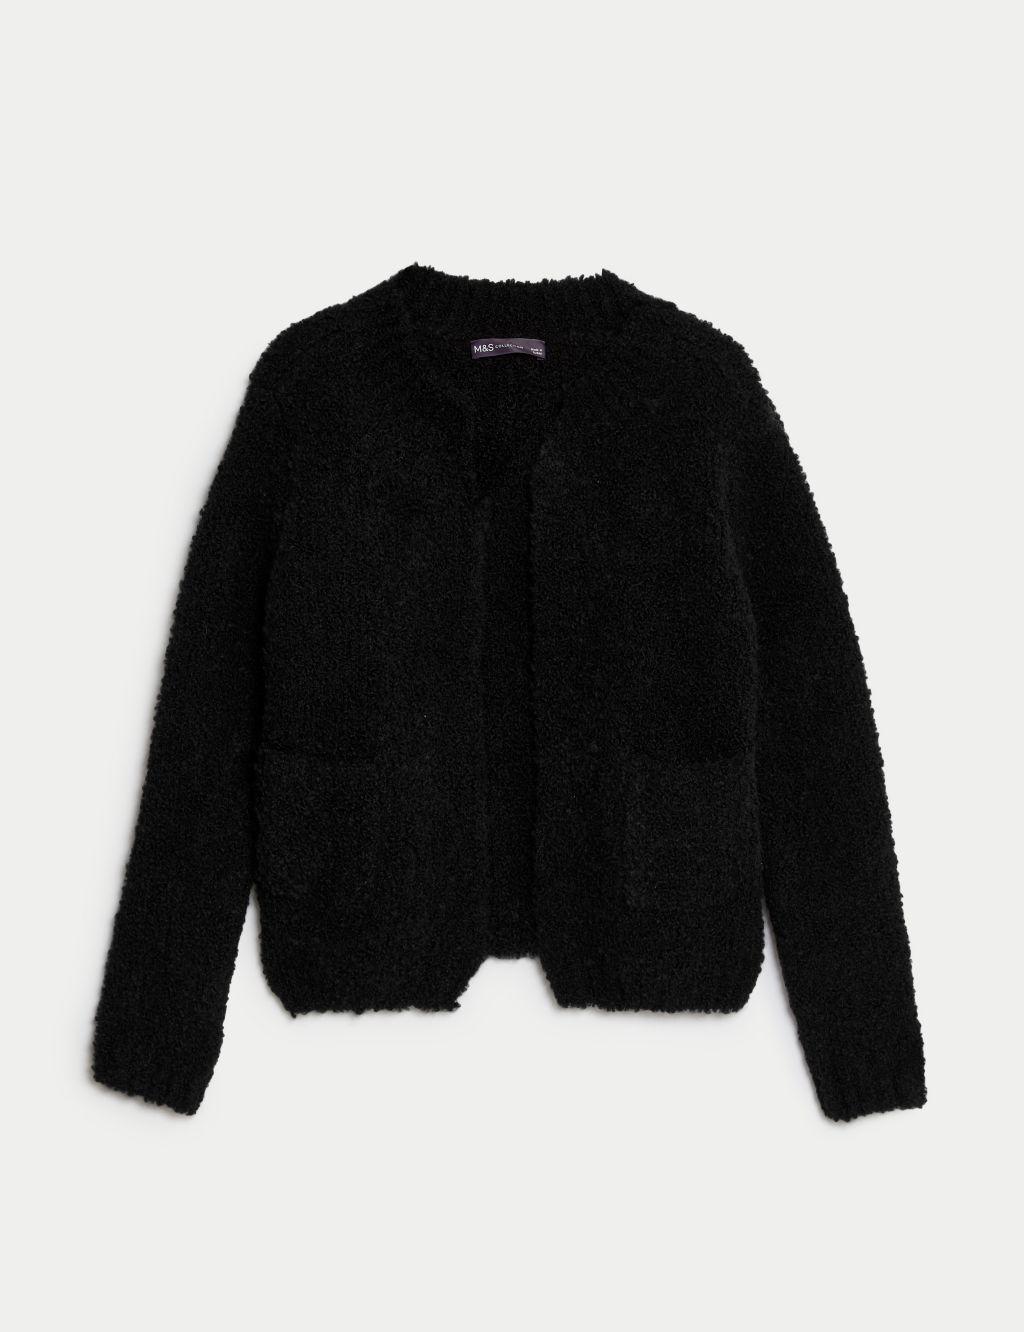 Textured Edge to Edge Knitted Jacket | M&S Collection | M&S